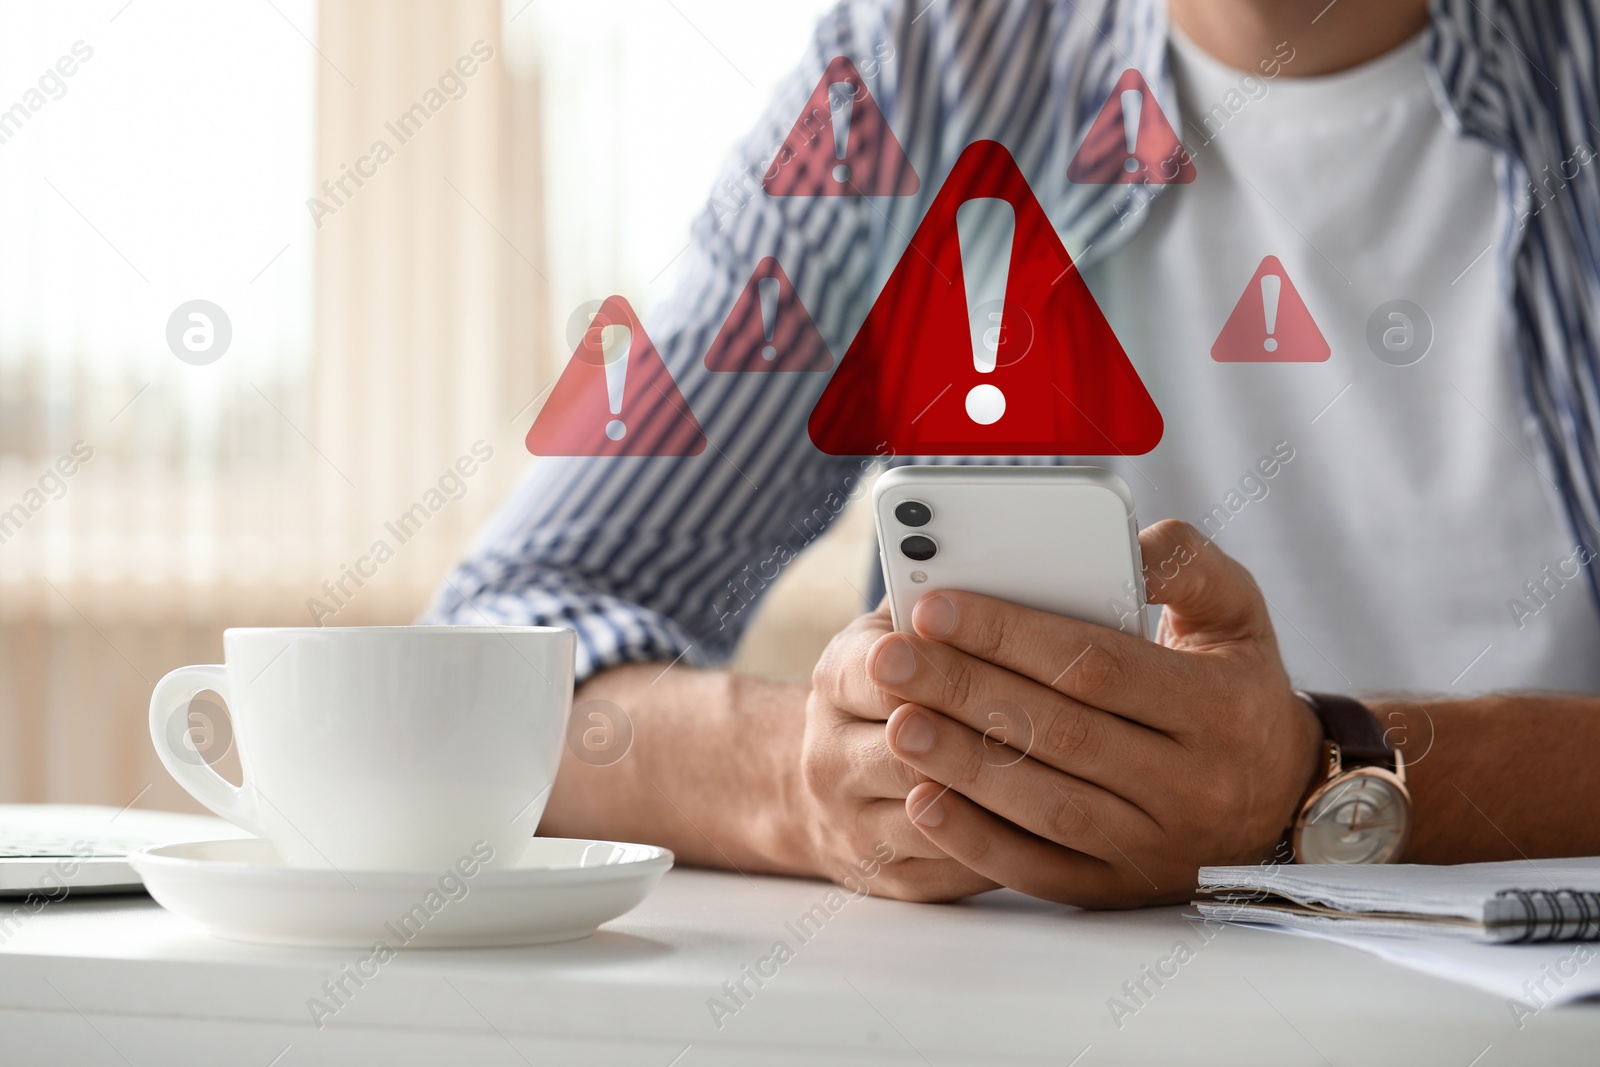 Image of Woman using smartphone at table indoors, closeup. Warning signs for spam message above device